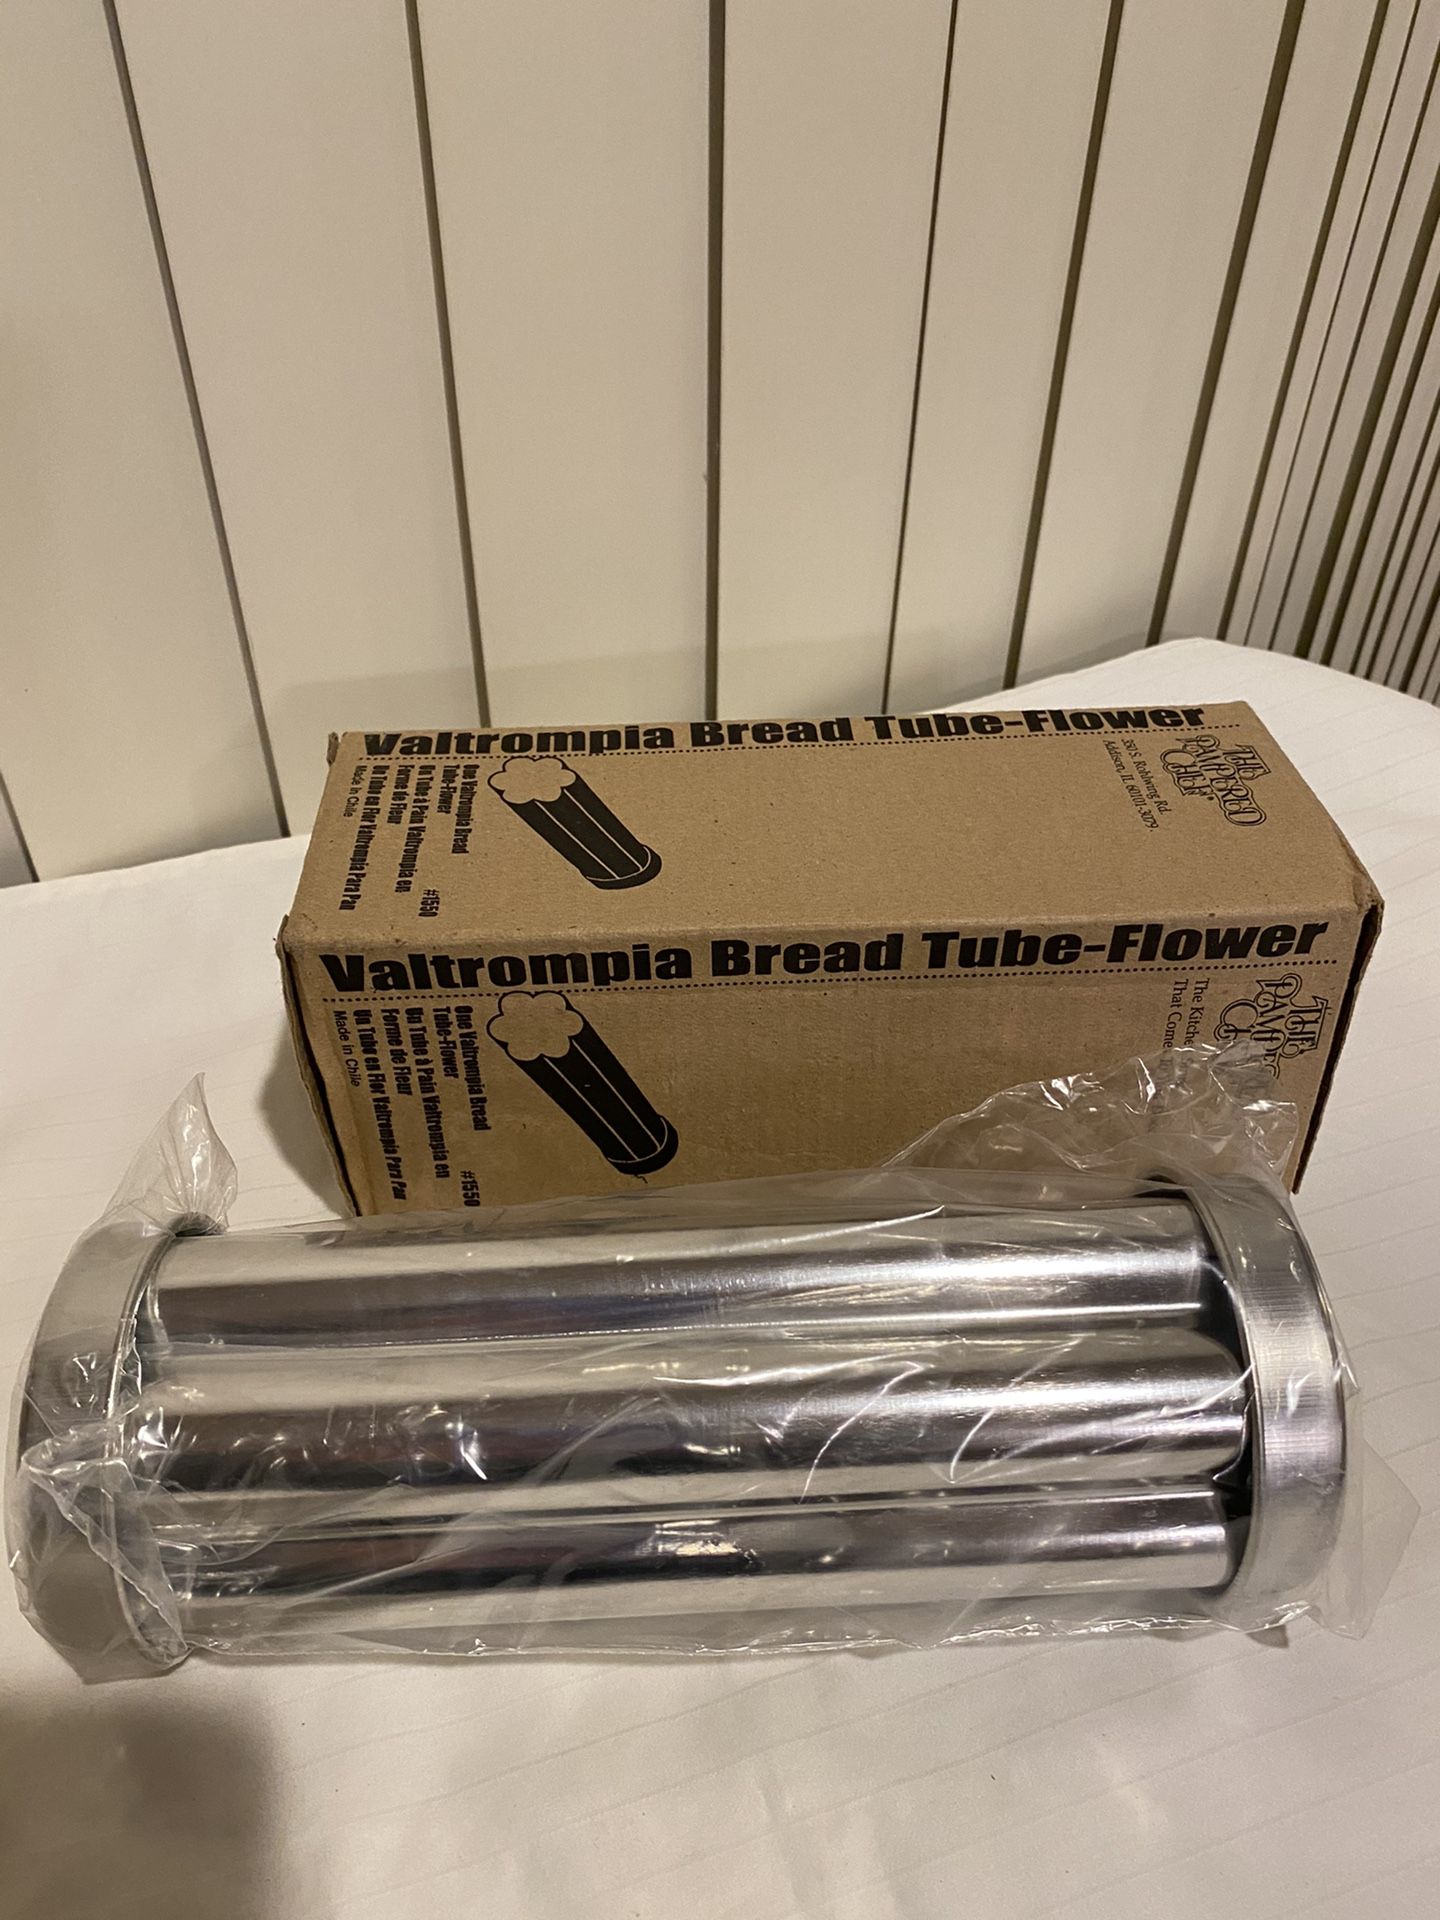 Pampered Chef Bread Tube-Flower